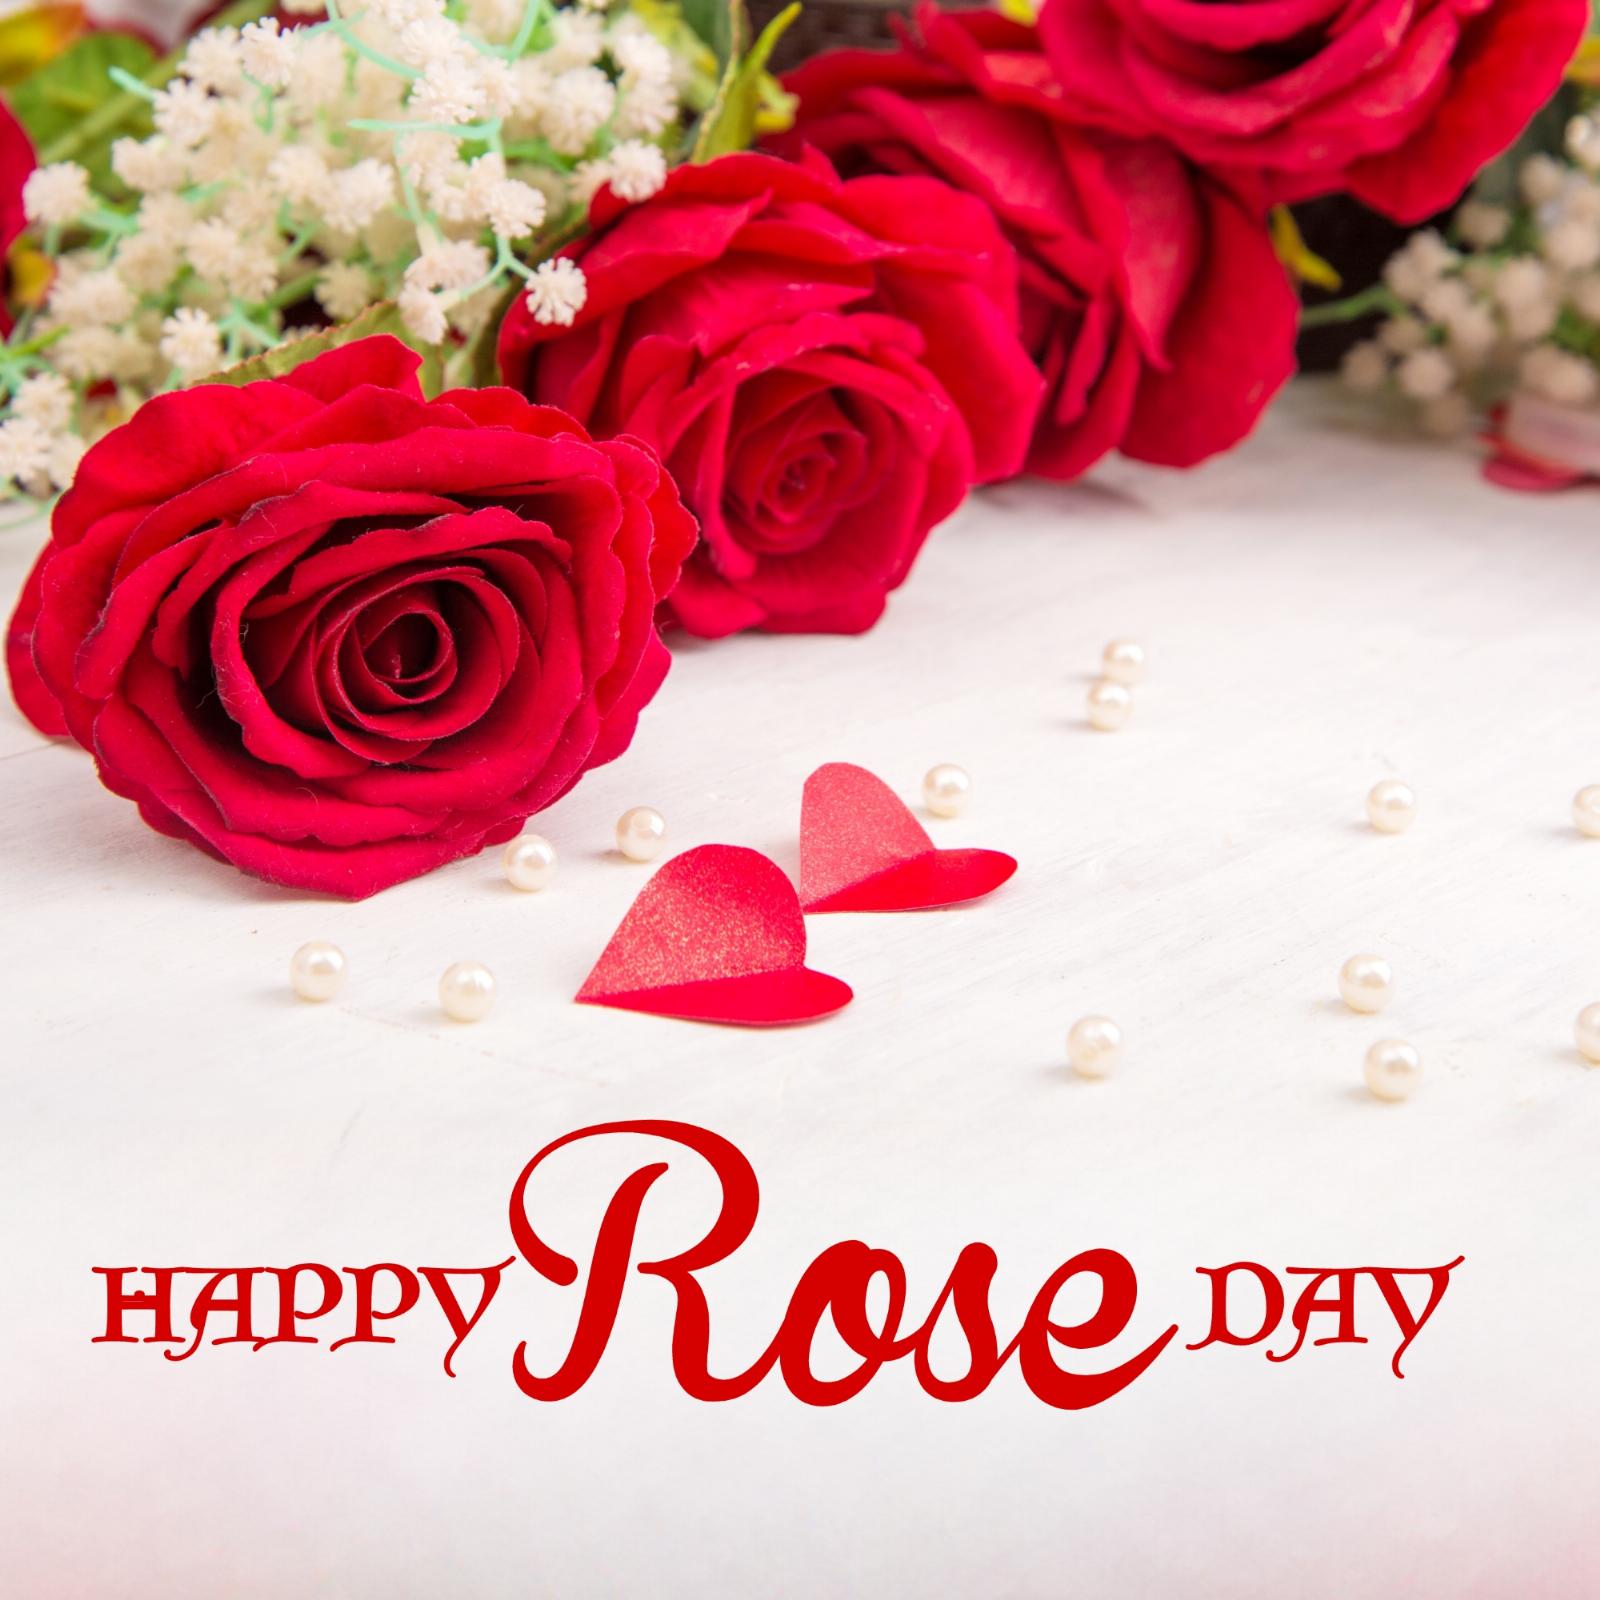 Happy Rose Day Images For Wife